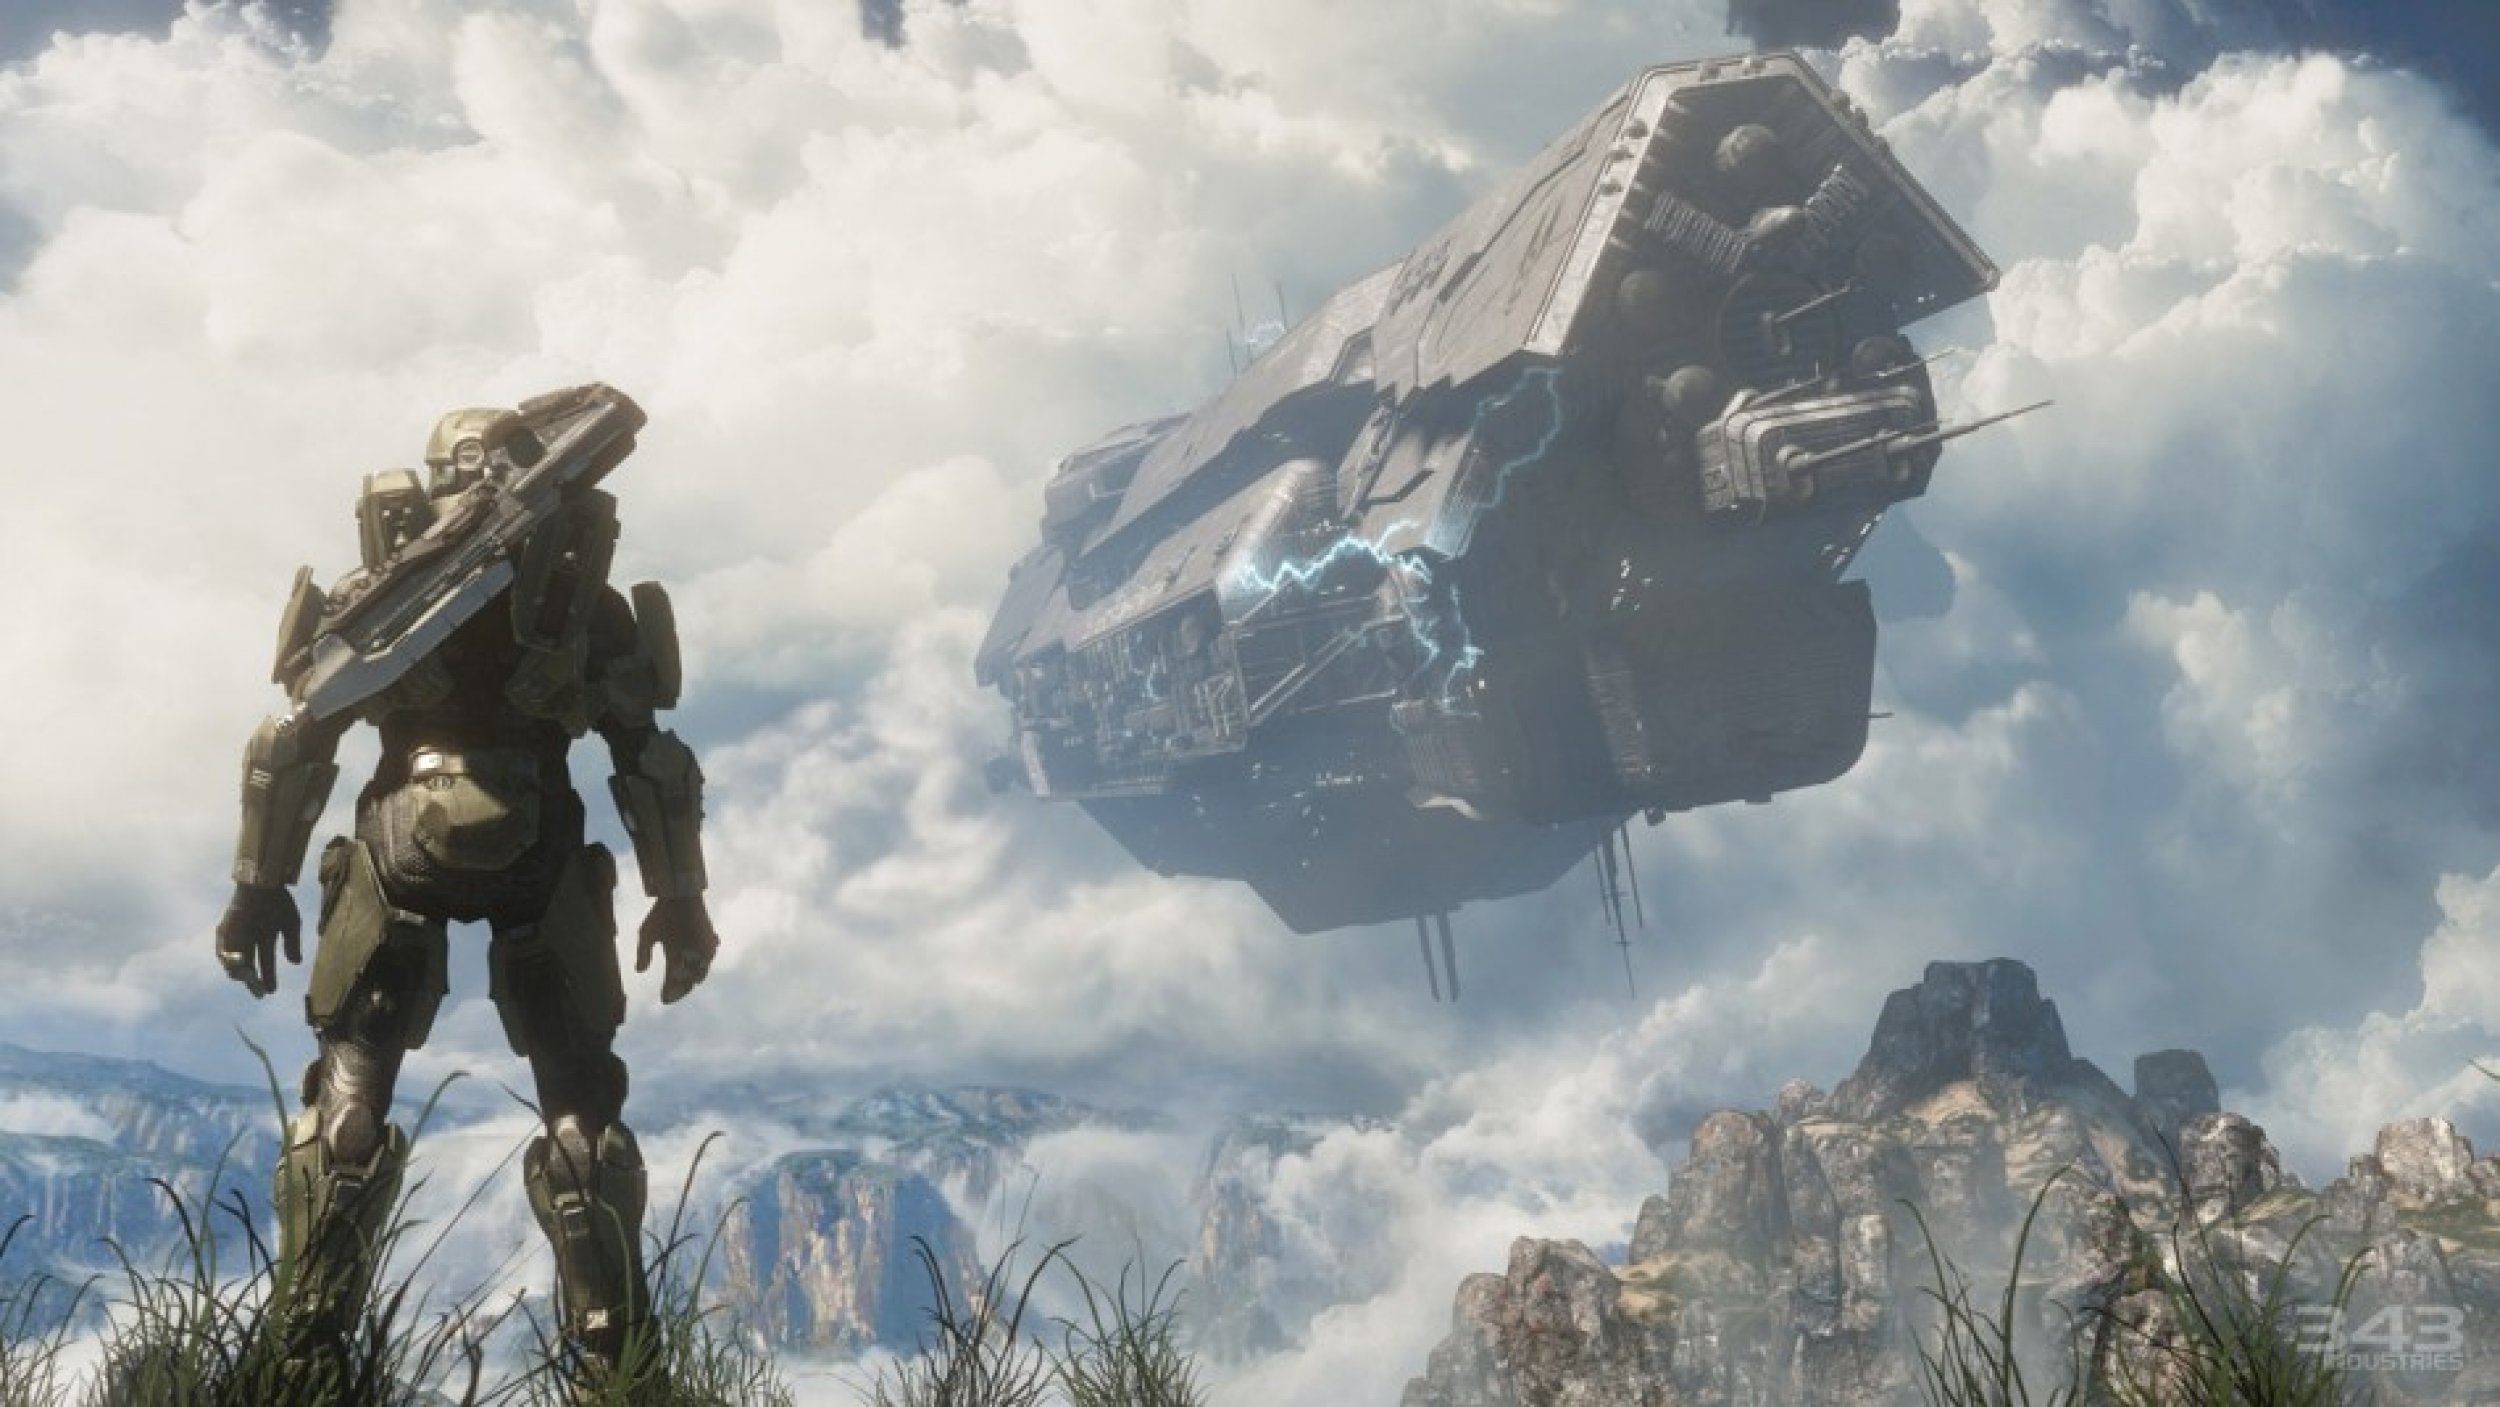 New Halo 4 Trailer Microsoft Debuts Trailer During NBA Finals [VIDEO]